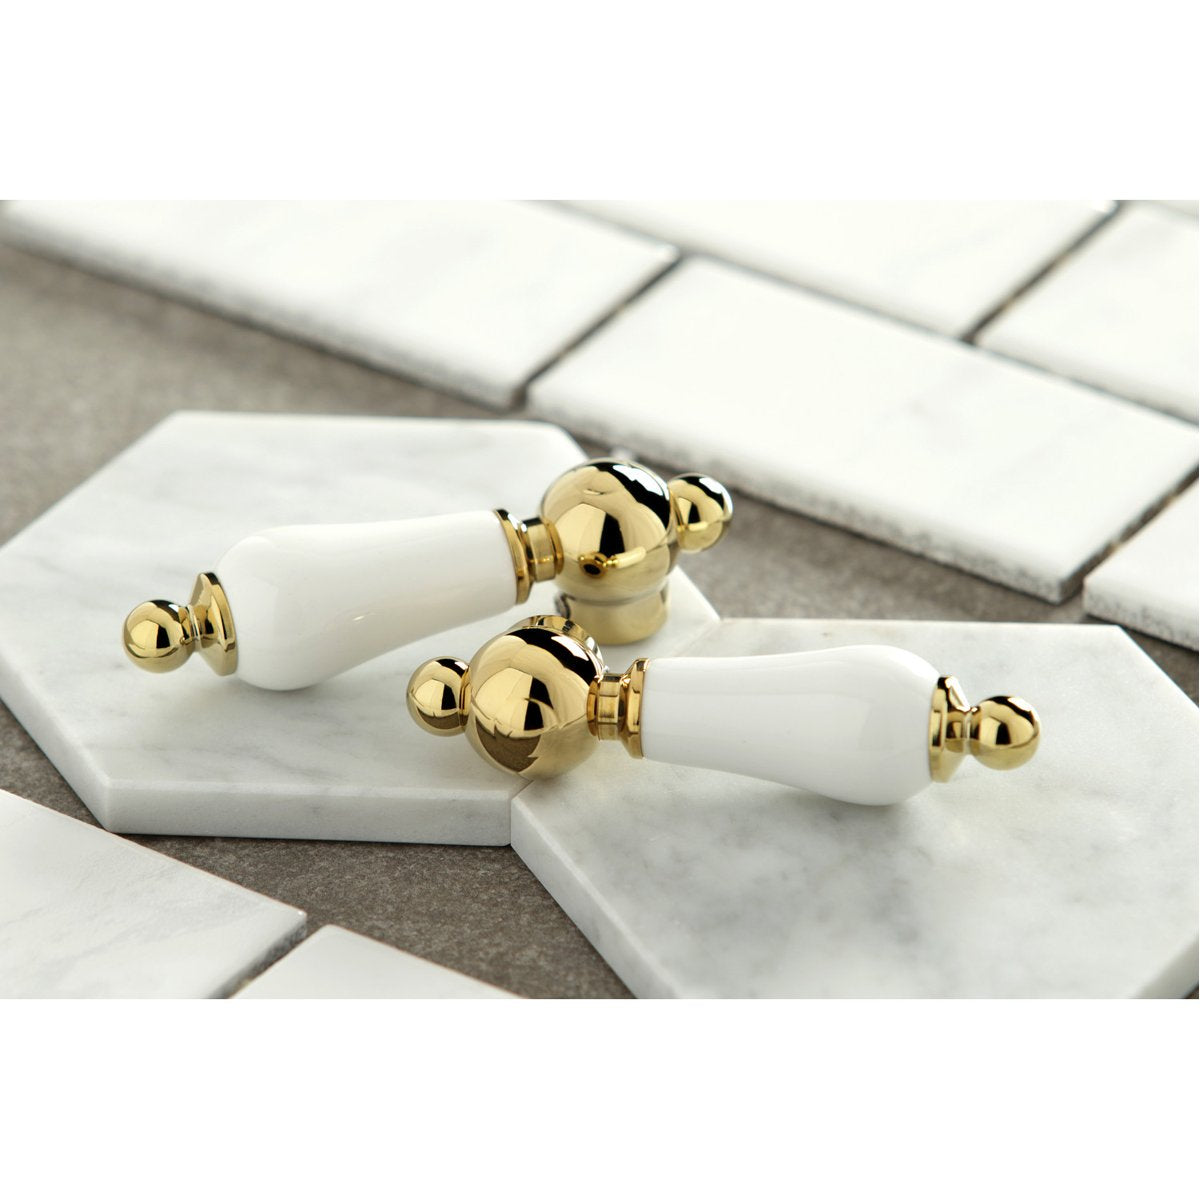 Kingston Brass Heritage 4-Inch Centerset Deck Mount Bathroom Faucet with Pop-Up Drain